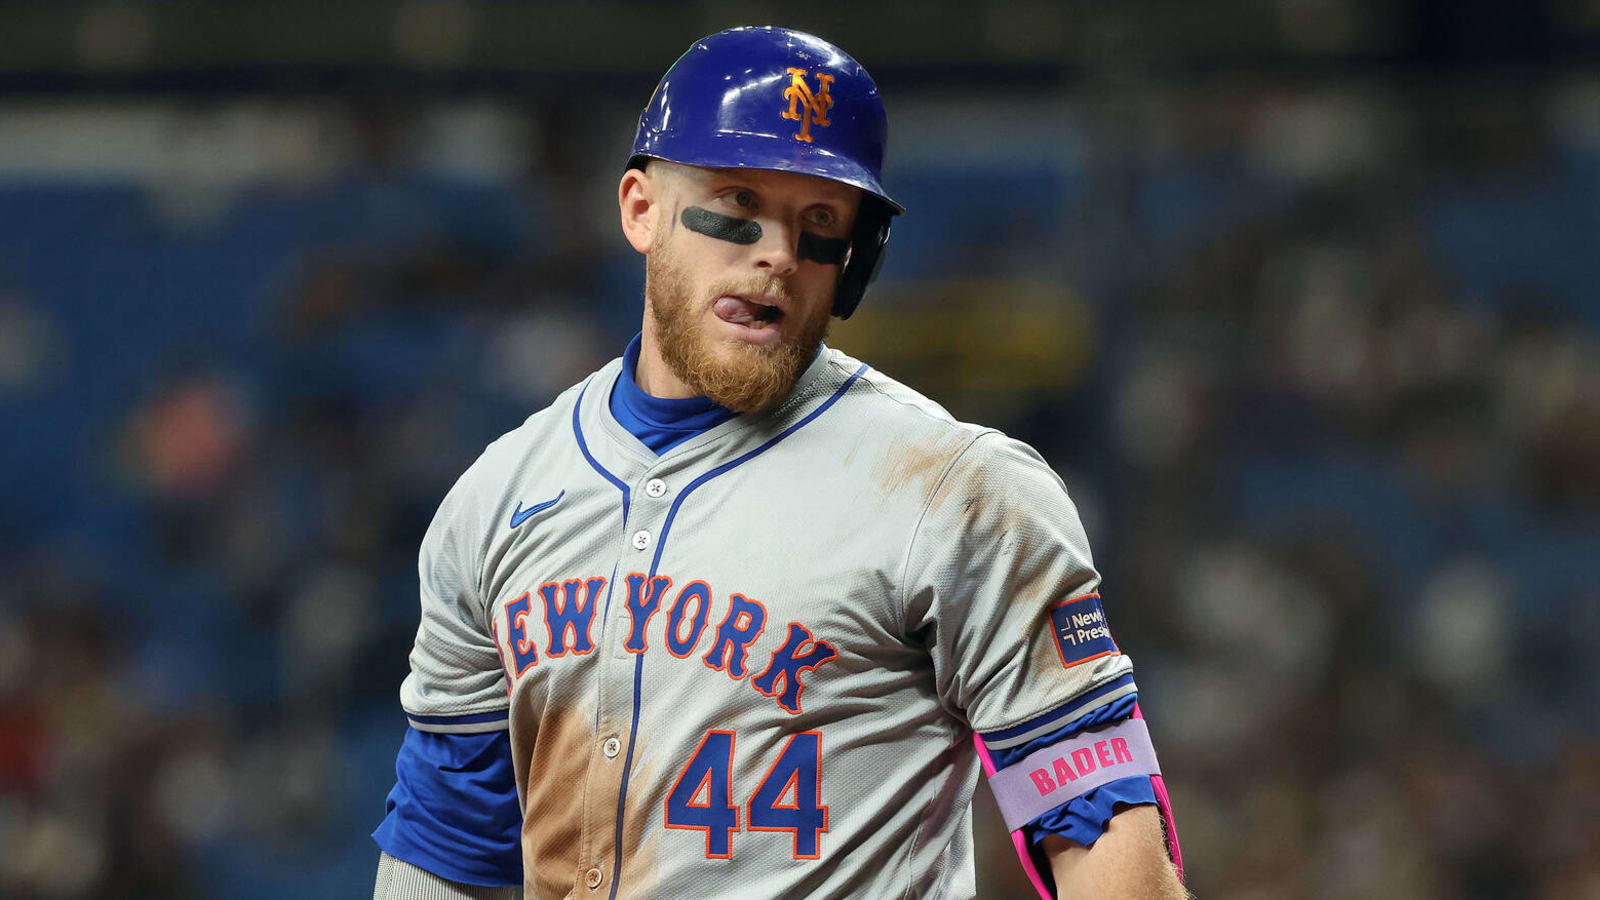 Mets veteran outfielder frustrated with playing time